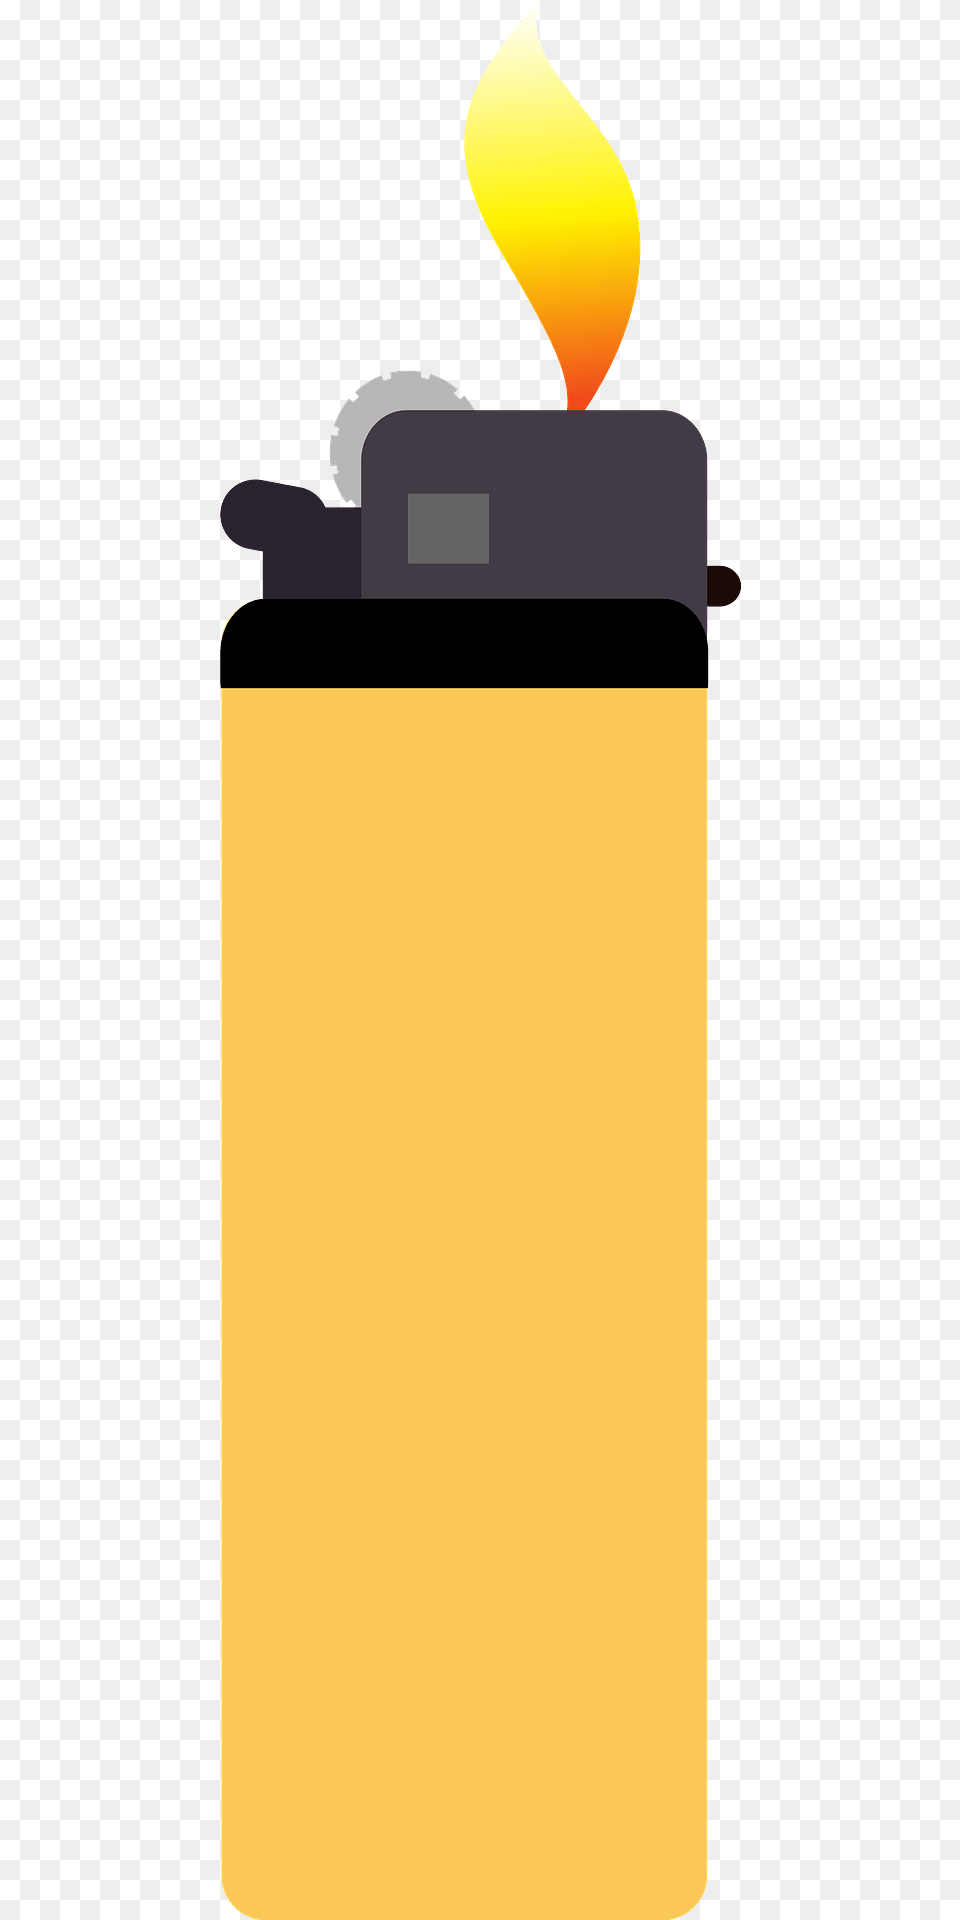 Yellow Lighter With Flame Clipart Free Transparent Png